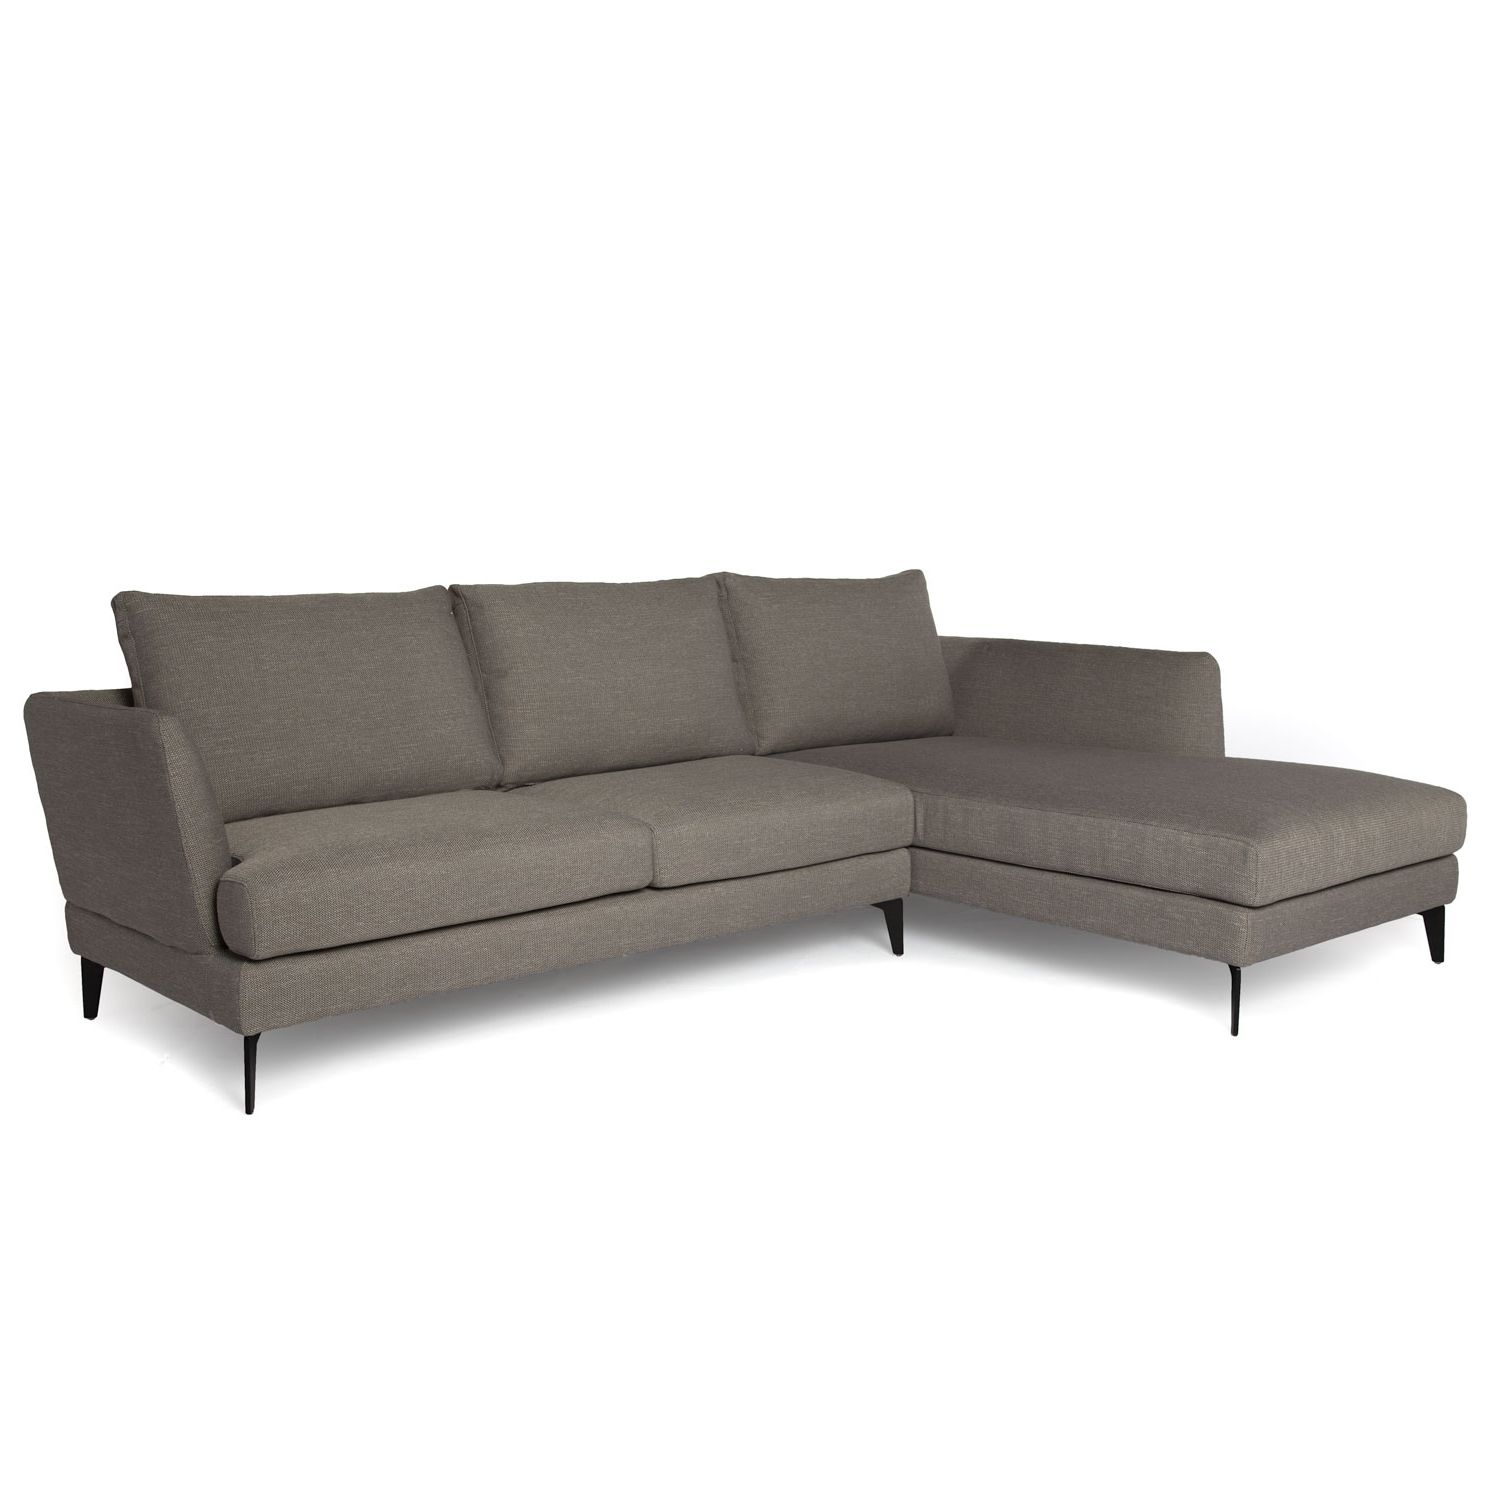 Contemporary Sectional In Light Grey Fabric For 2019 Vancouver Bc Canada Sectional Sofas (View 16 of 20)